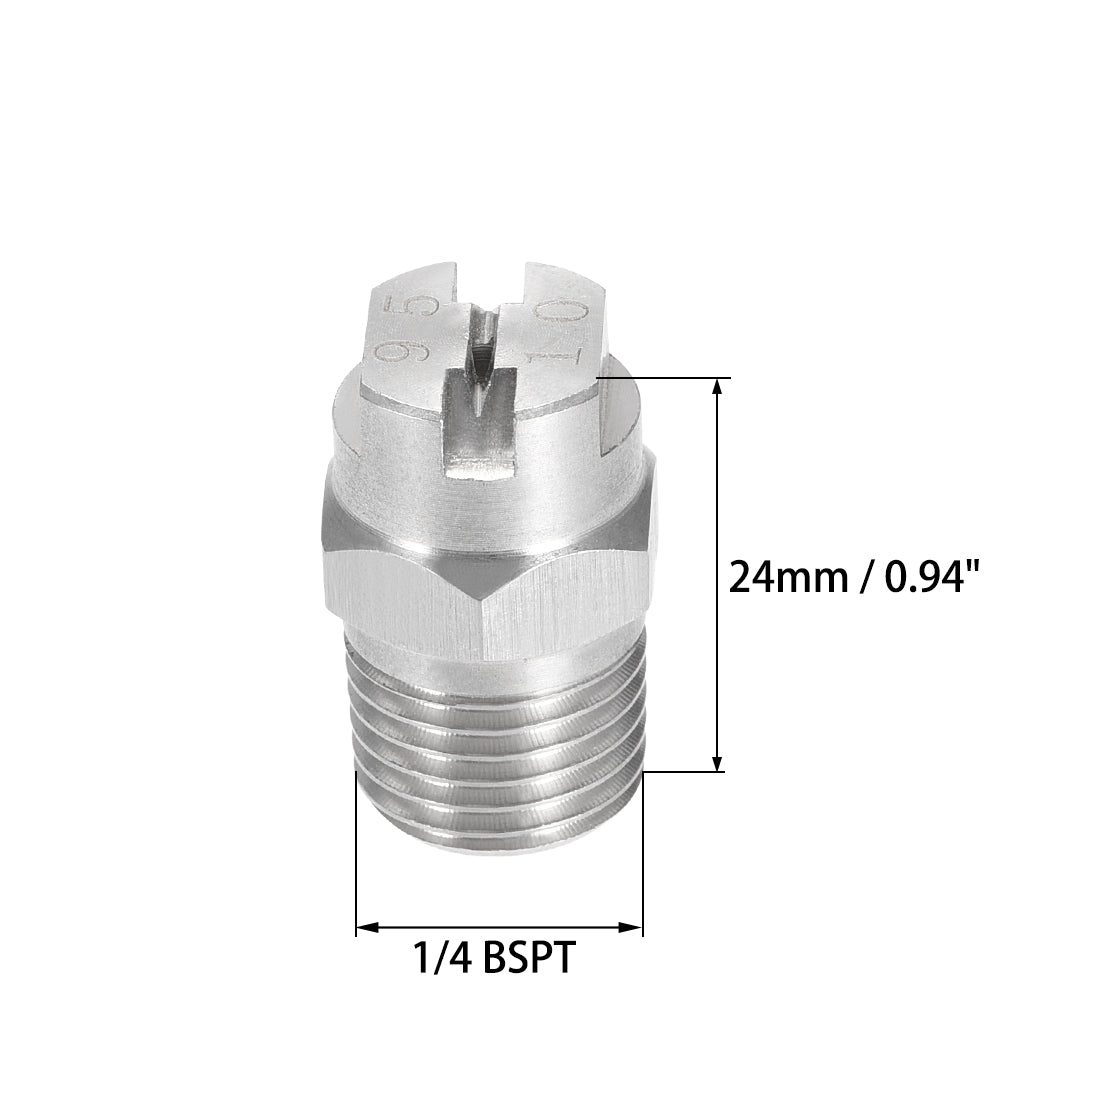 Uxcell Uxcell Flat Fan Spray Tip - 1/4BSPT Male Thread 304 Stainless Steel Nozzle - 95 Degree 2.8mm Orifice Diameter - 2 Pcs